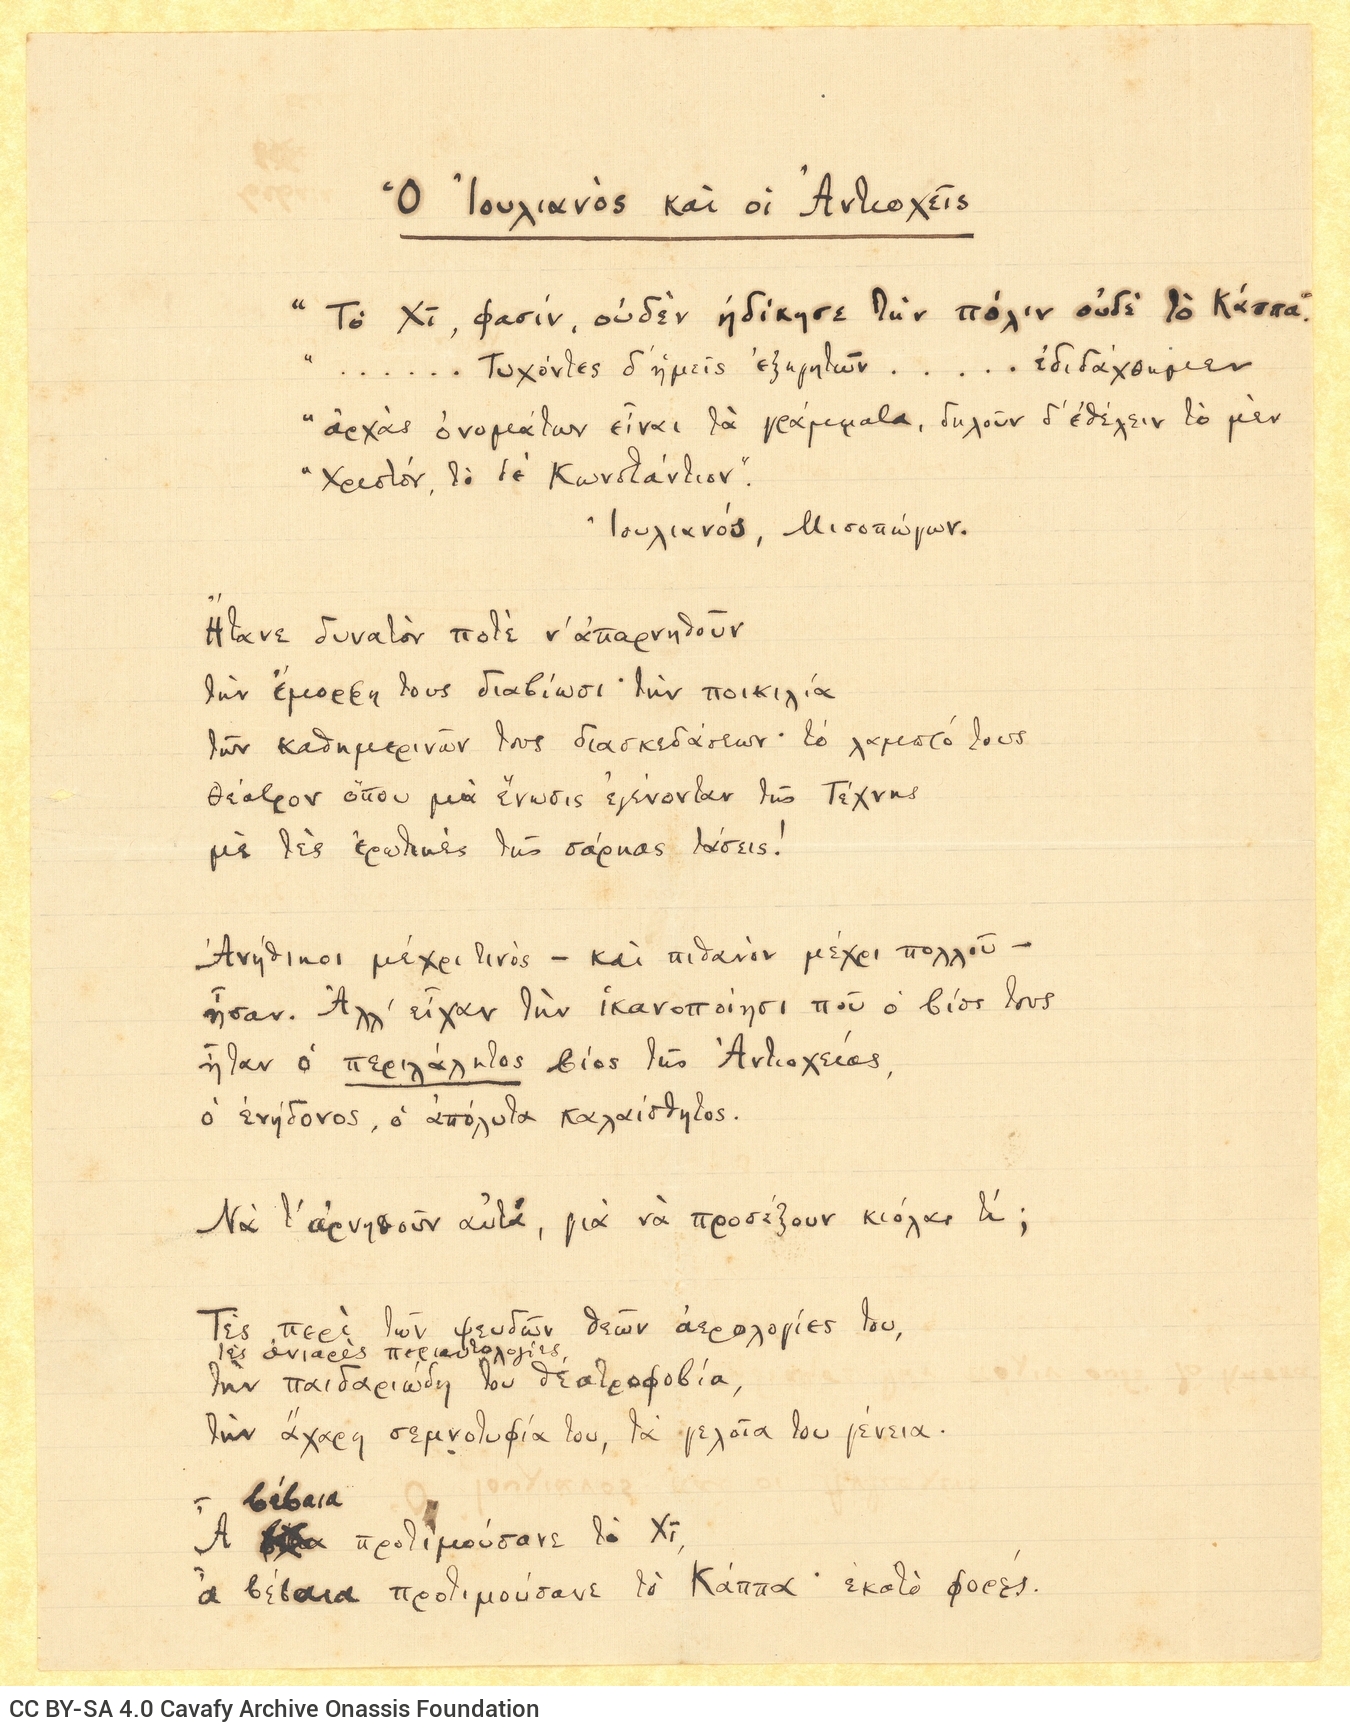 Manuscript of the poem "Julian and the Antiochenes" on one side of a ruled sheet. Blank verso.